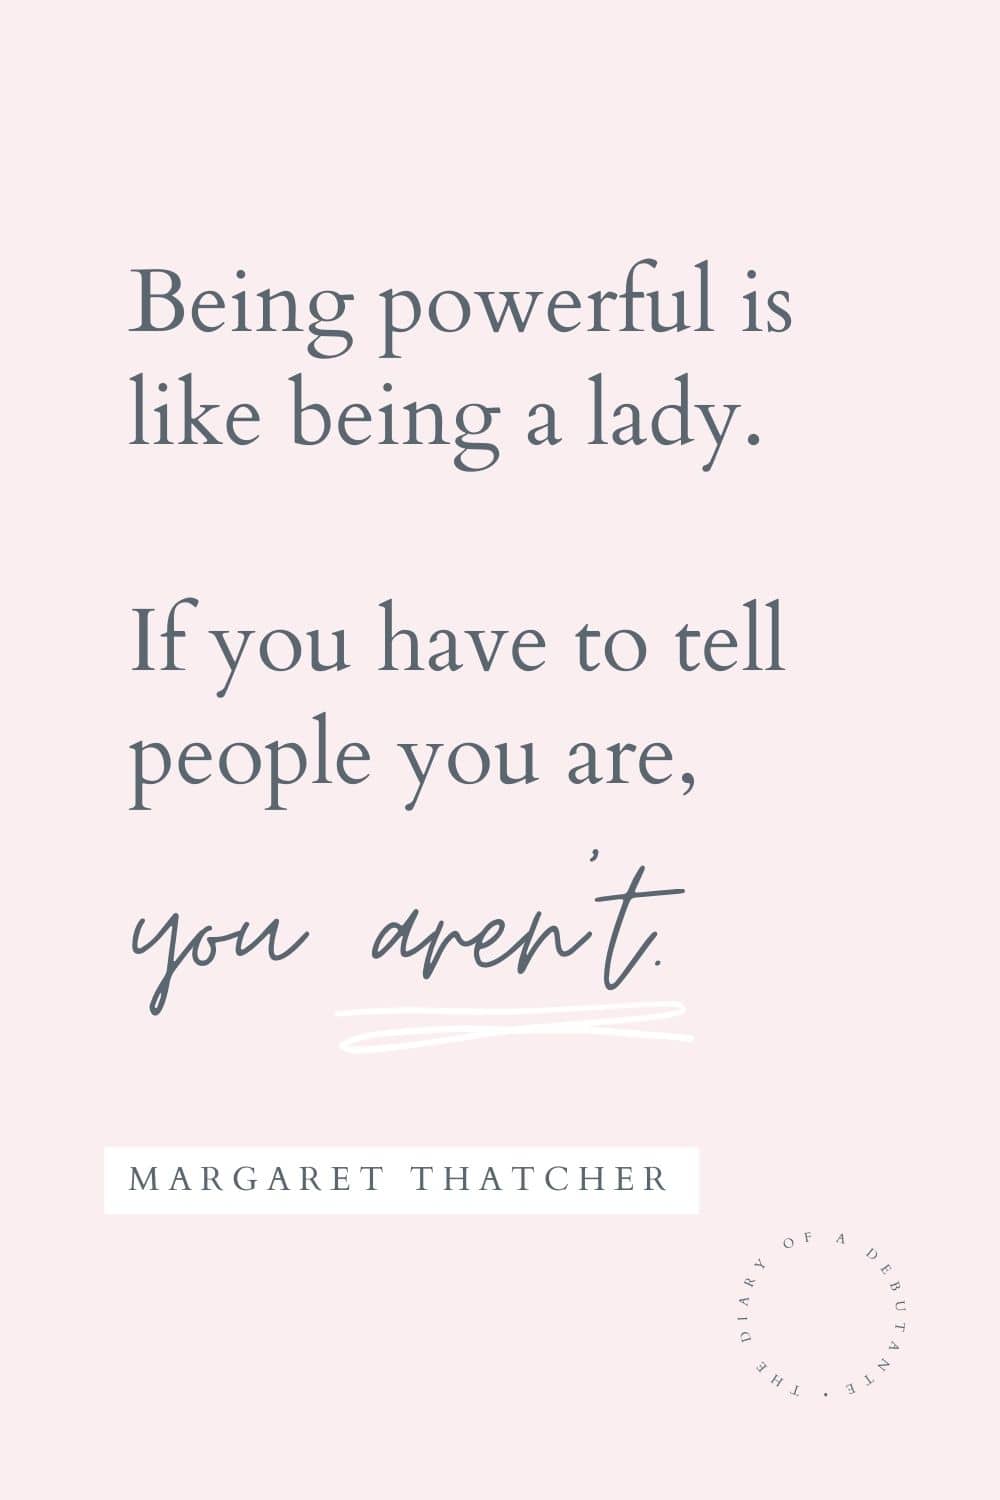 Margaret Thatcher quote about being a lady curated as part of a collection of motivational female quotes for Women's History Month by blogger Stephanie Ziajka on Diary of a Debutante